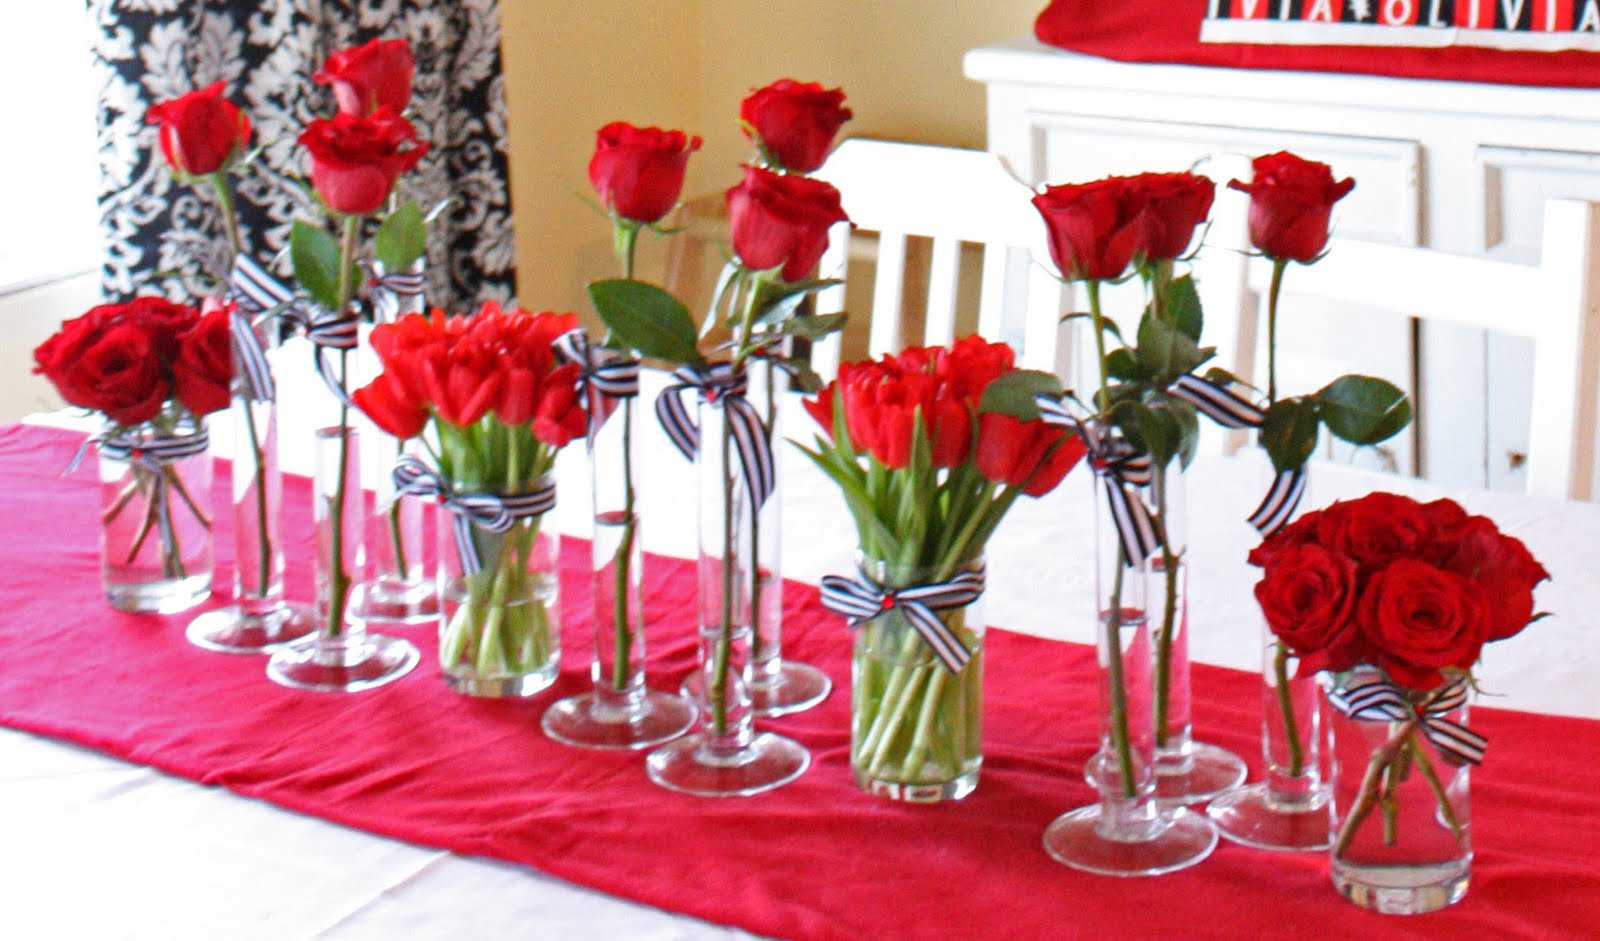 original decoration of the apartment with improvised materials for Valentine's Day